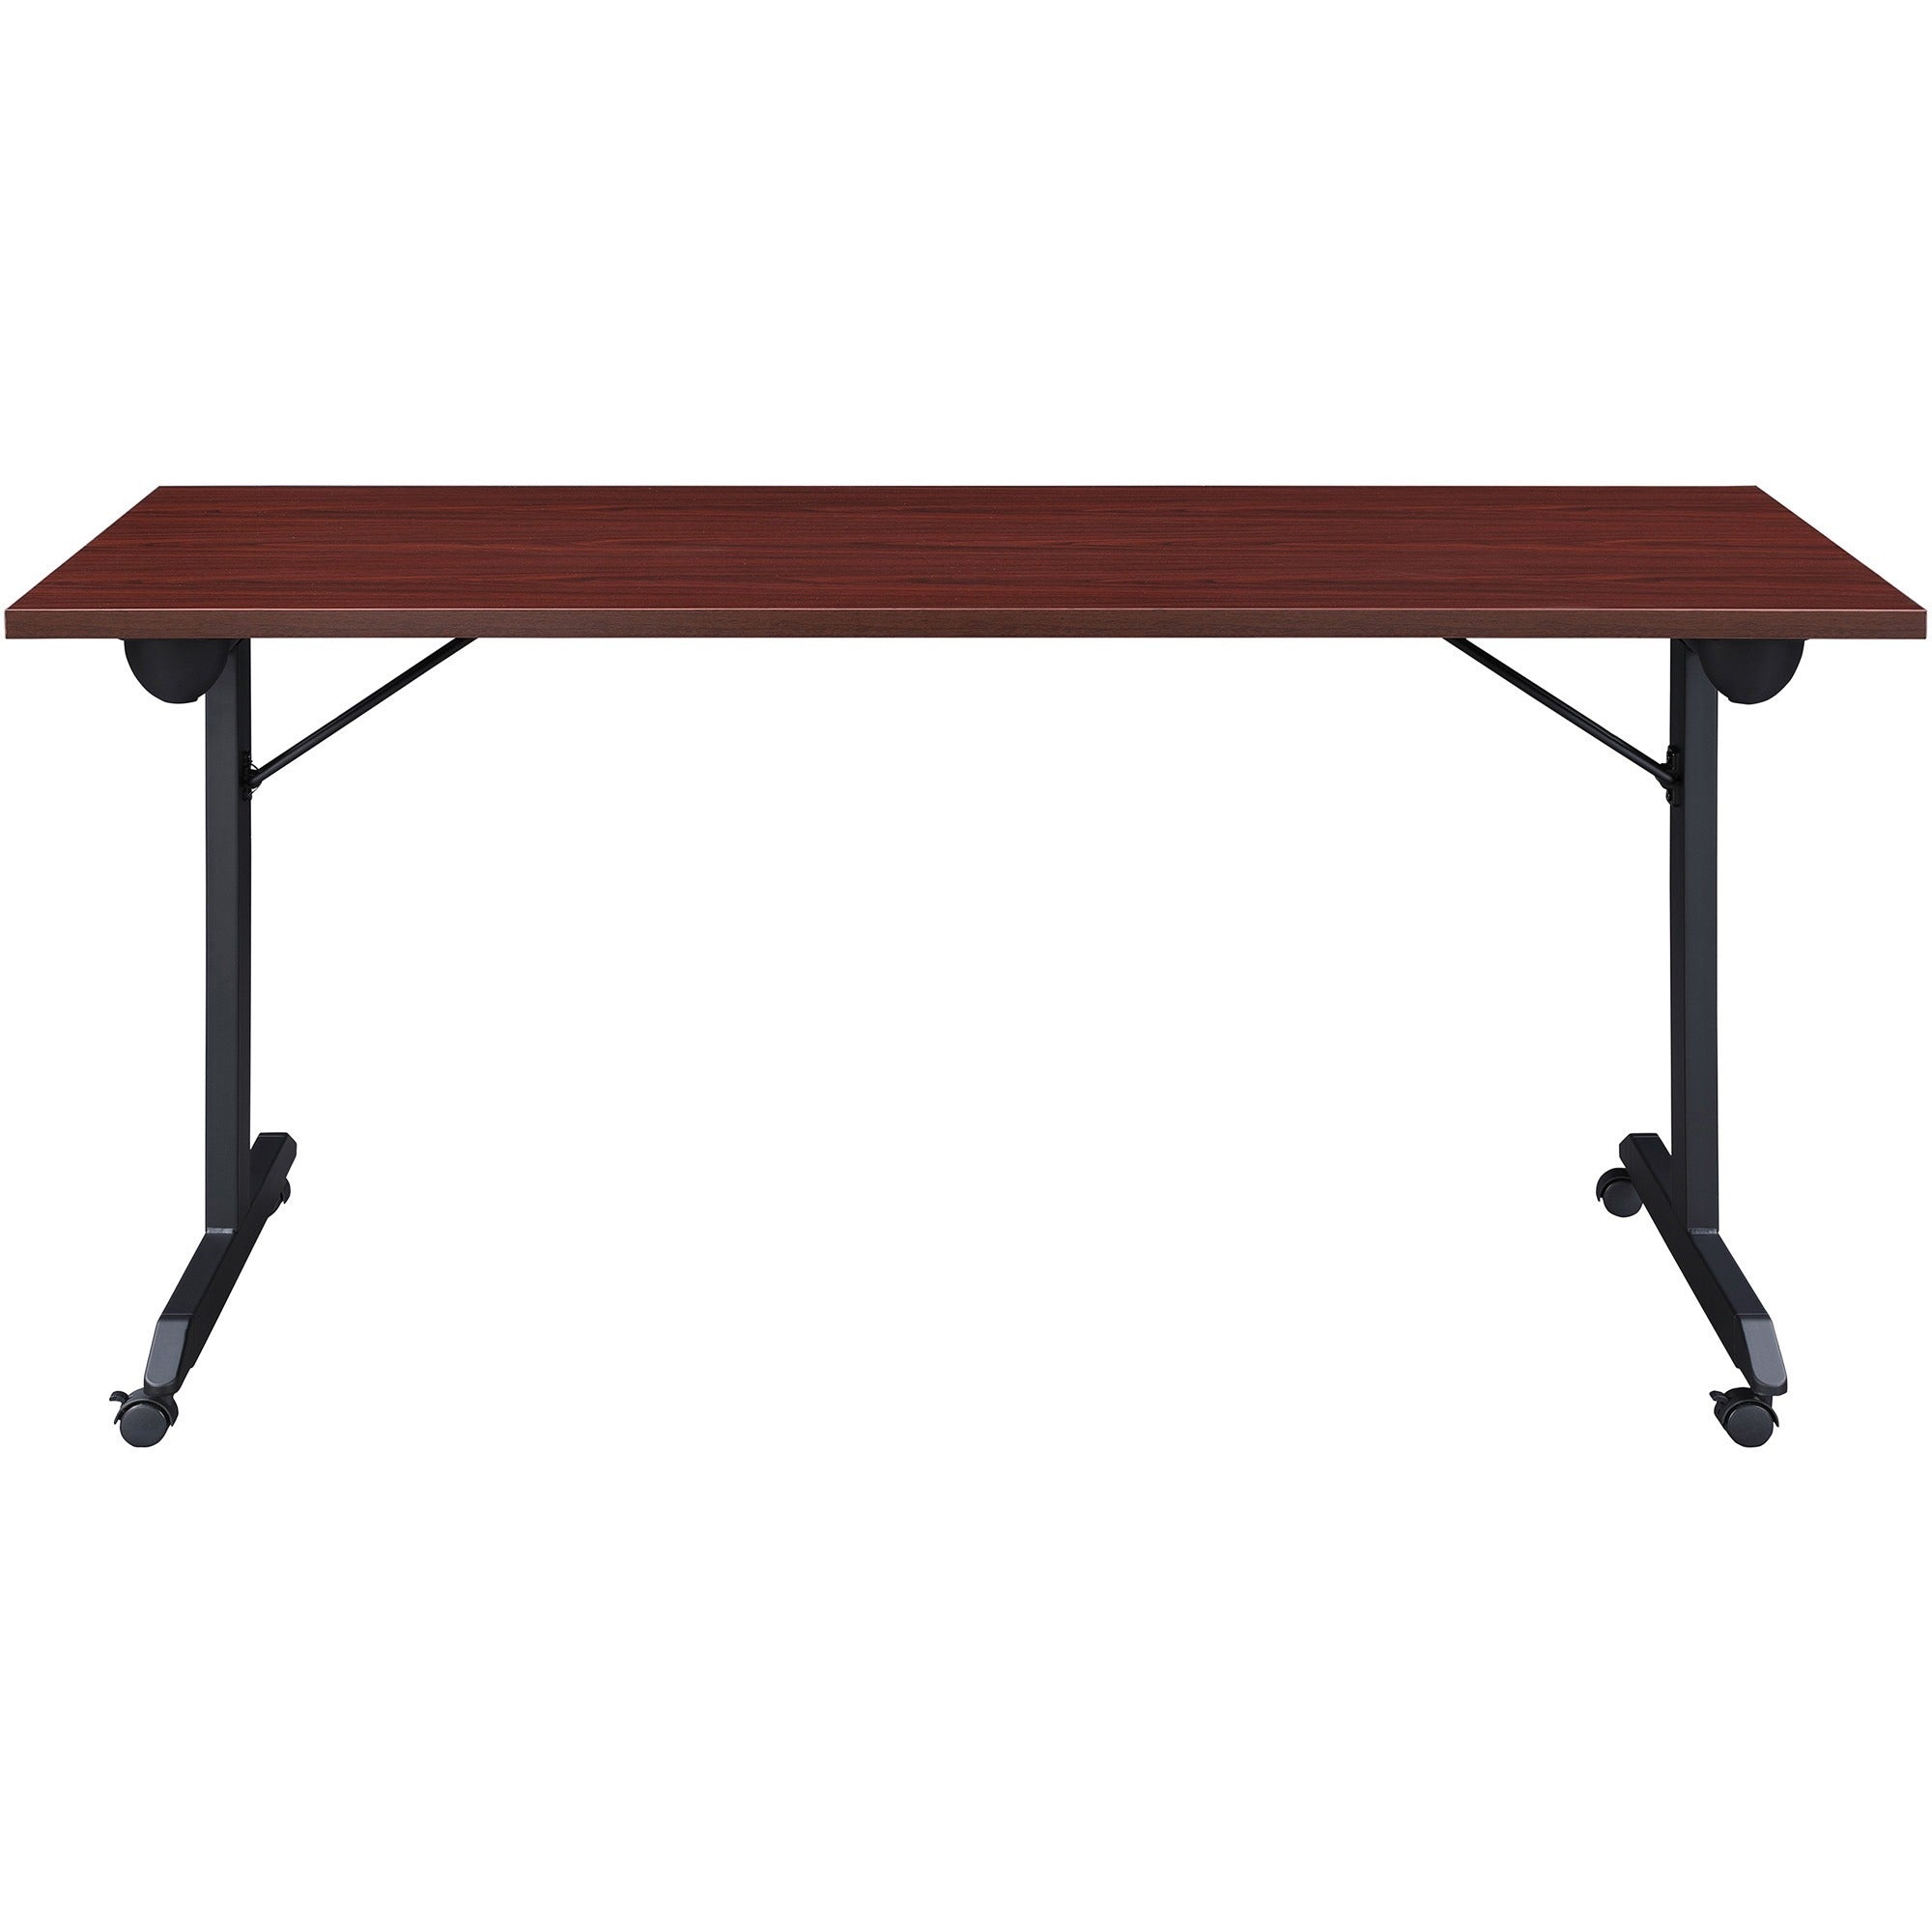 lorell-mobile-folding-training-table-for-table-toprectangle-top-powder-coated-base-200-lb-capacity-x-63-table-top-width-2950-height-x-63-width-x-2950-depth-assembly-required-brown-1-each_llr60740 - 3